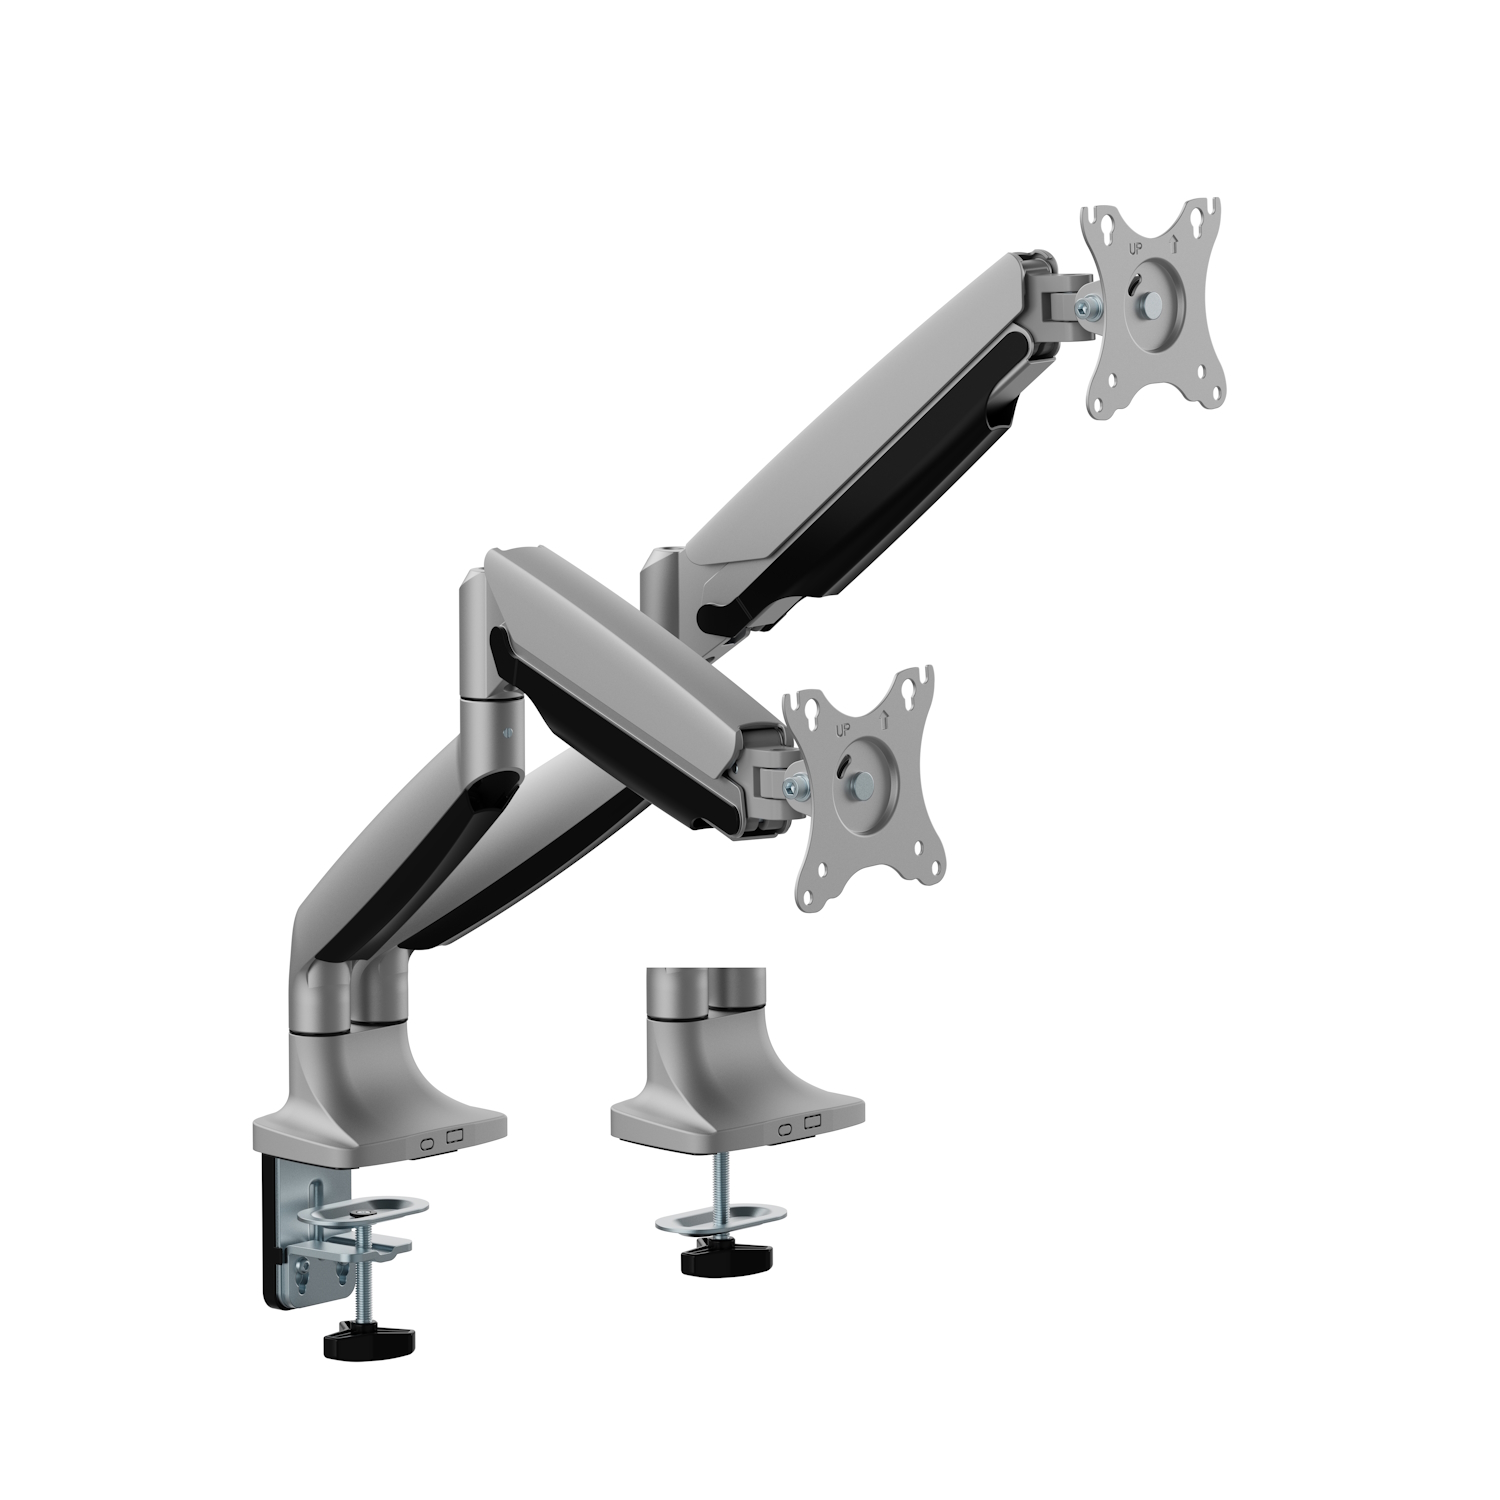 EW1528 | Heavy-Duty Dual Monitor Support Arm for 2 Monitors up to 35" | Ewent | distributori informatica